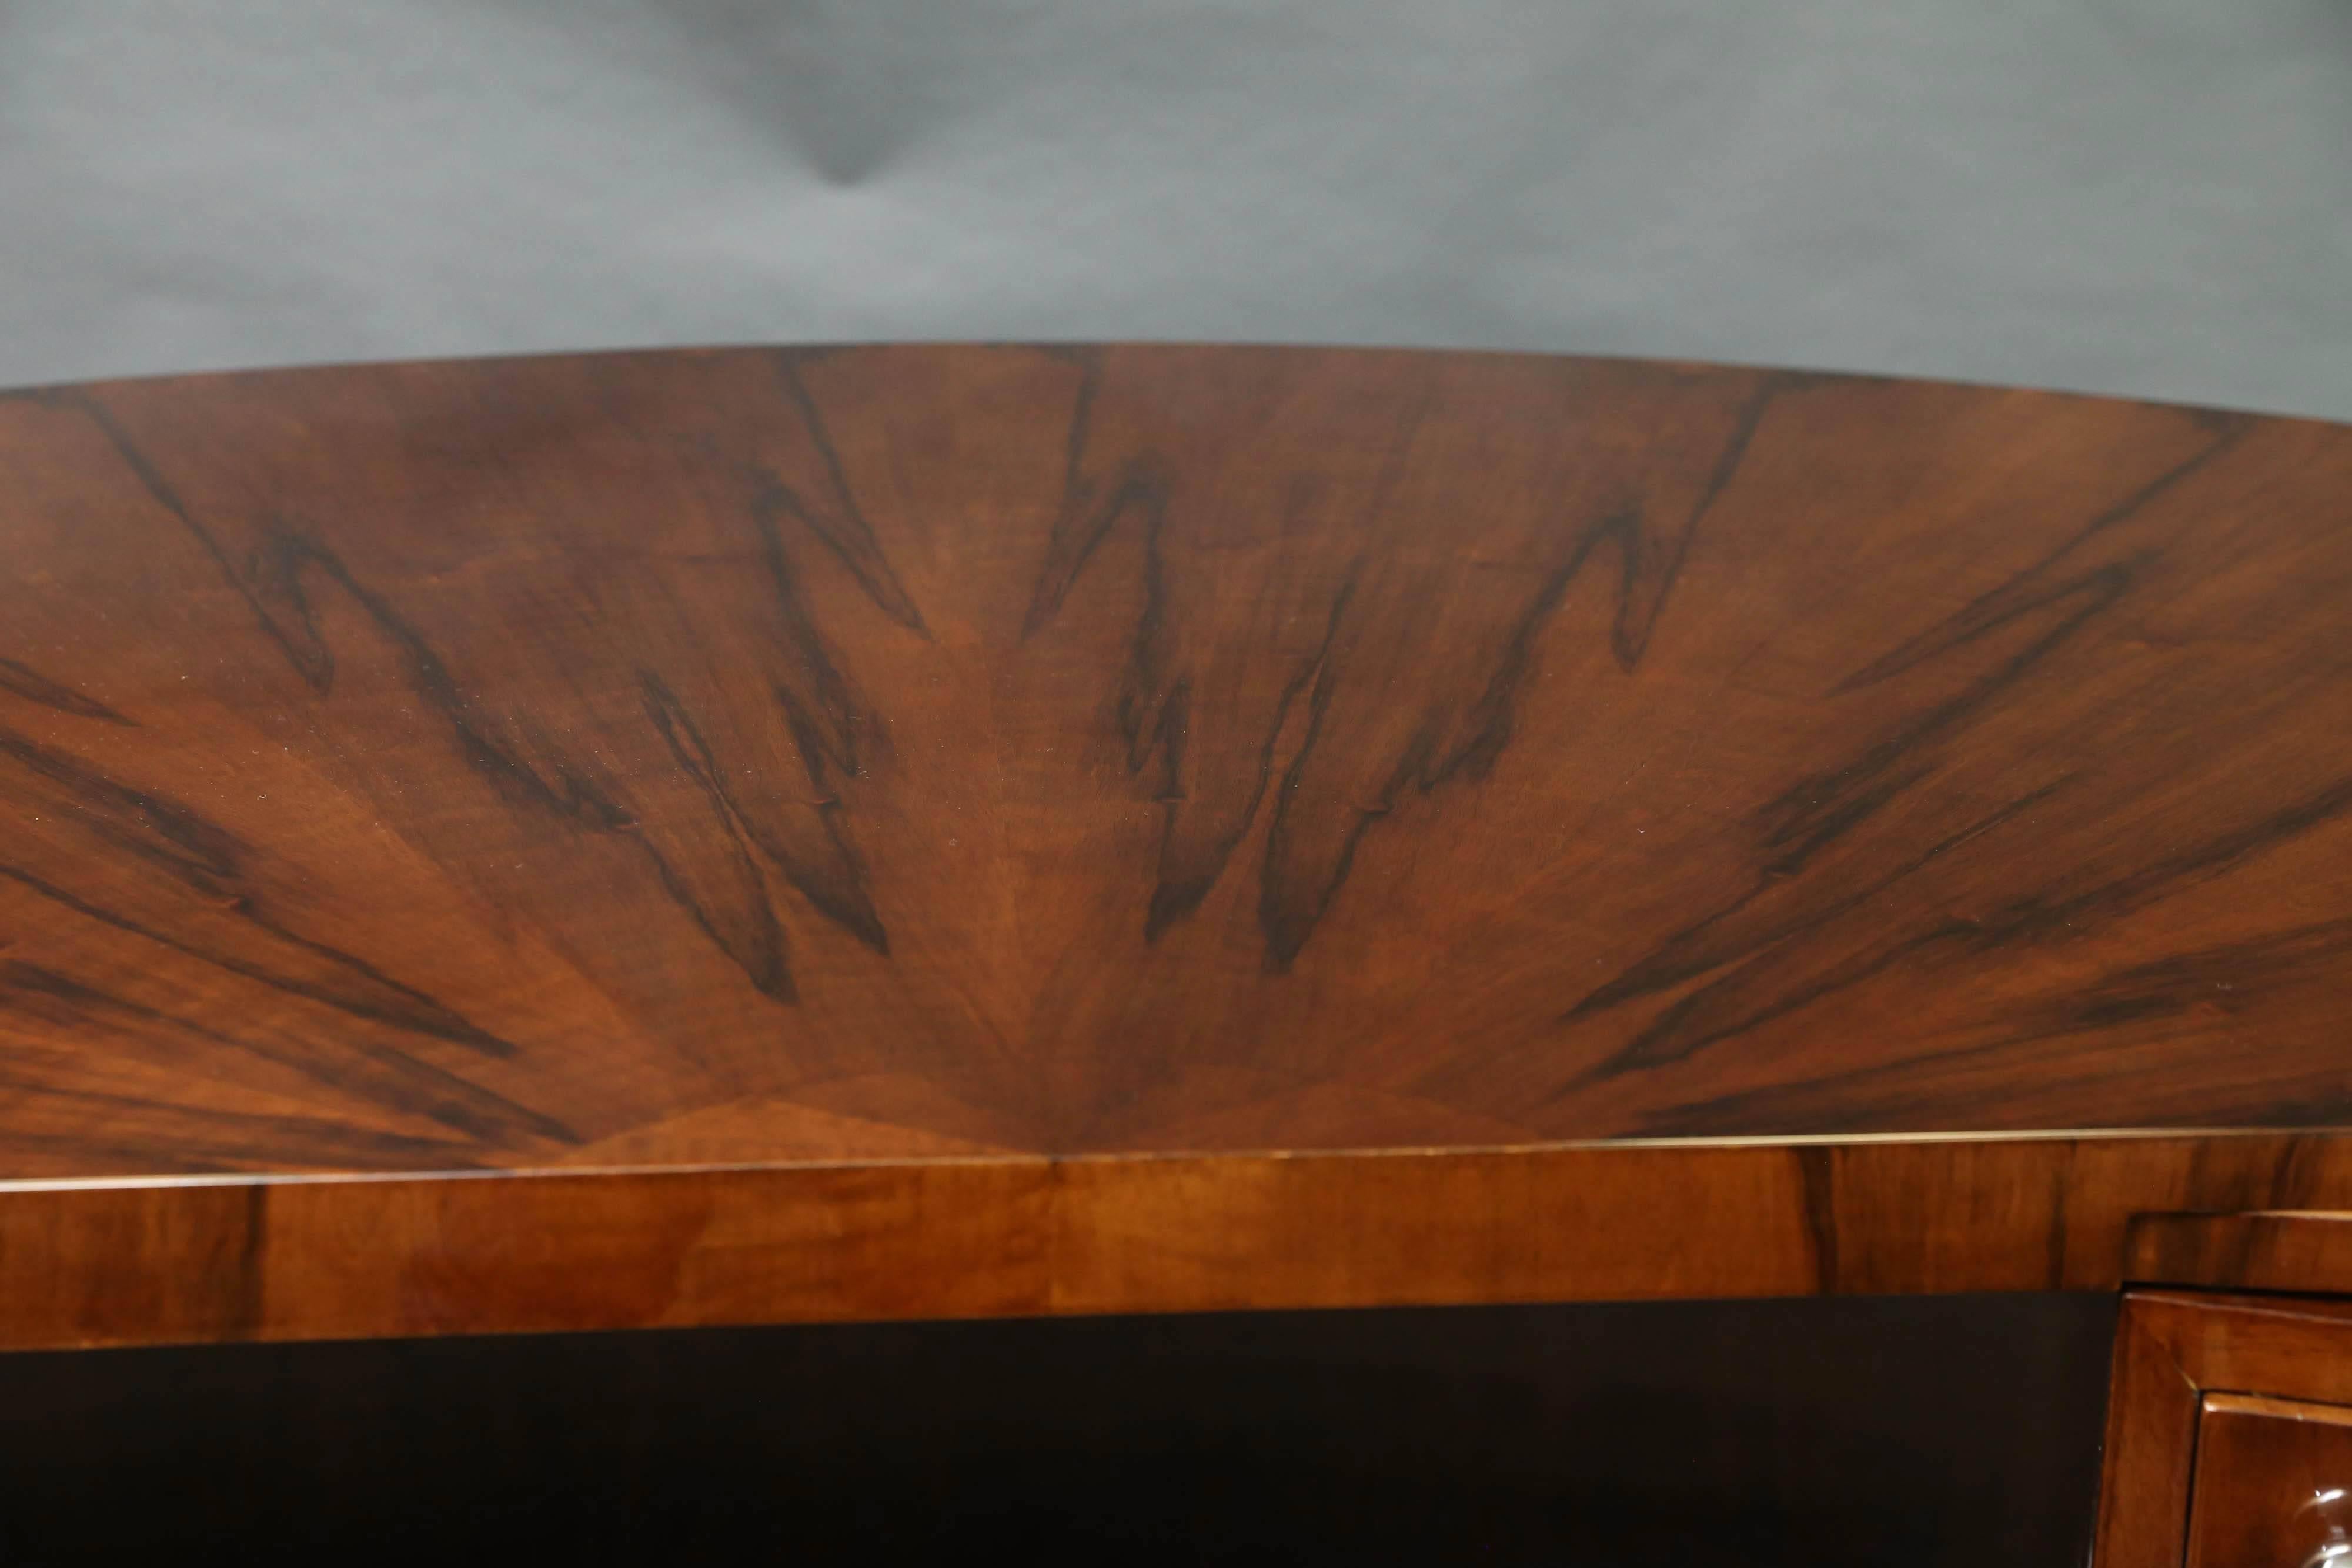 The desk is made out of high quality walnut wood. The tabletop is showing a beautiful design of wood, bursting sun rays. 
 On the right side of the desk there is one big drawer, on the left four smaller drawers. For the extra convenience, there are